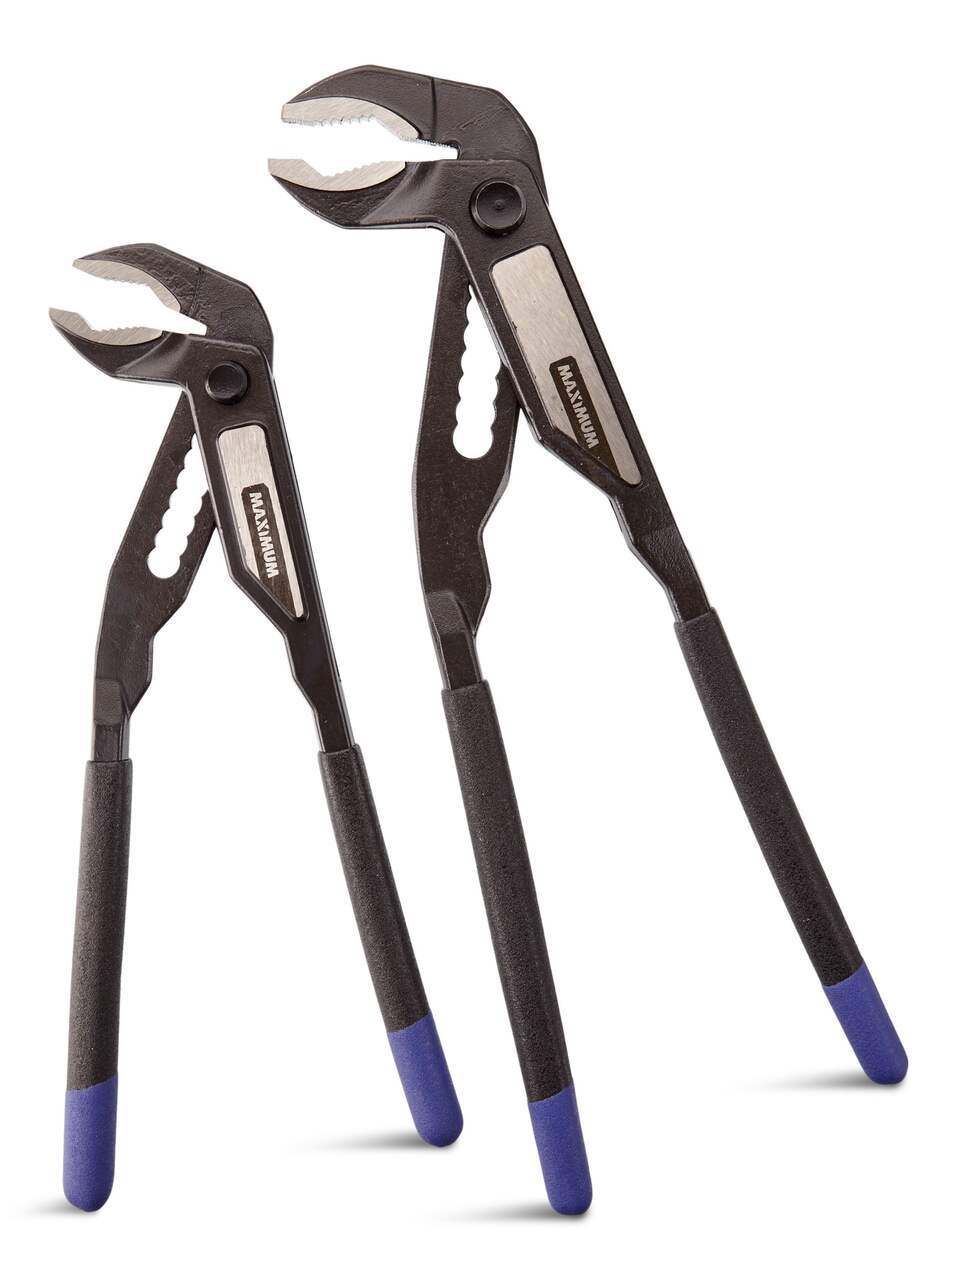 https://media-www.canadiantire.ca/product/fixing/tools/metal-working/0589755/maximum-2pc-tongue-and-groove-set-2be57799-b41a-4bfe-b3a7-d3c235720696-jpgrendition.jpg?imdensity=1&imwidth=640&impolicy=mZoom